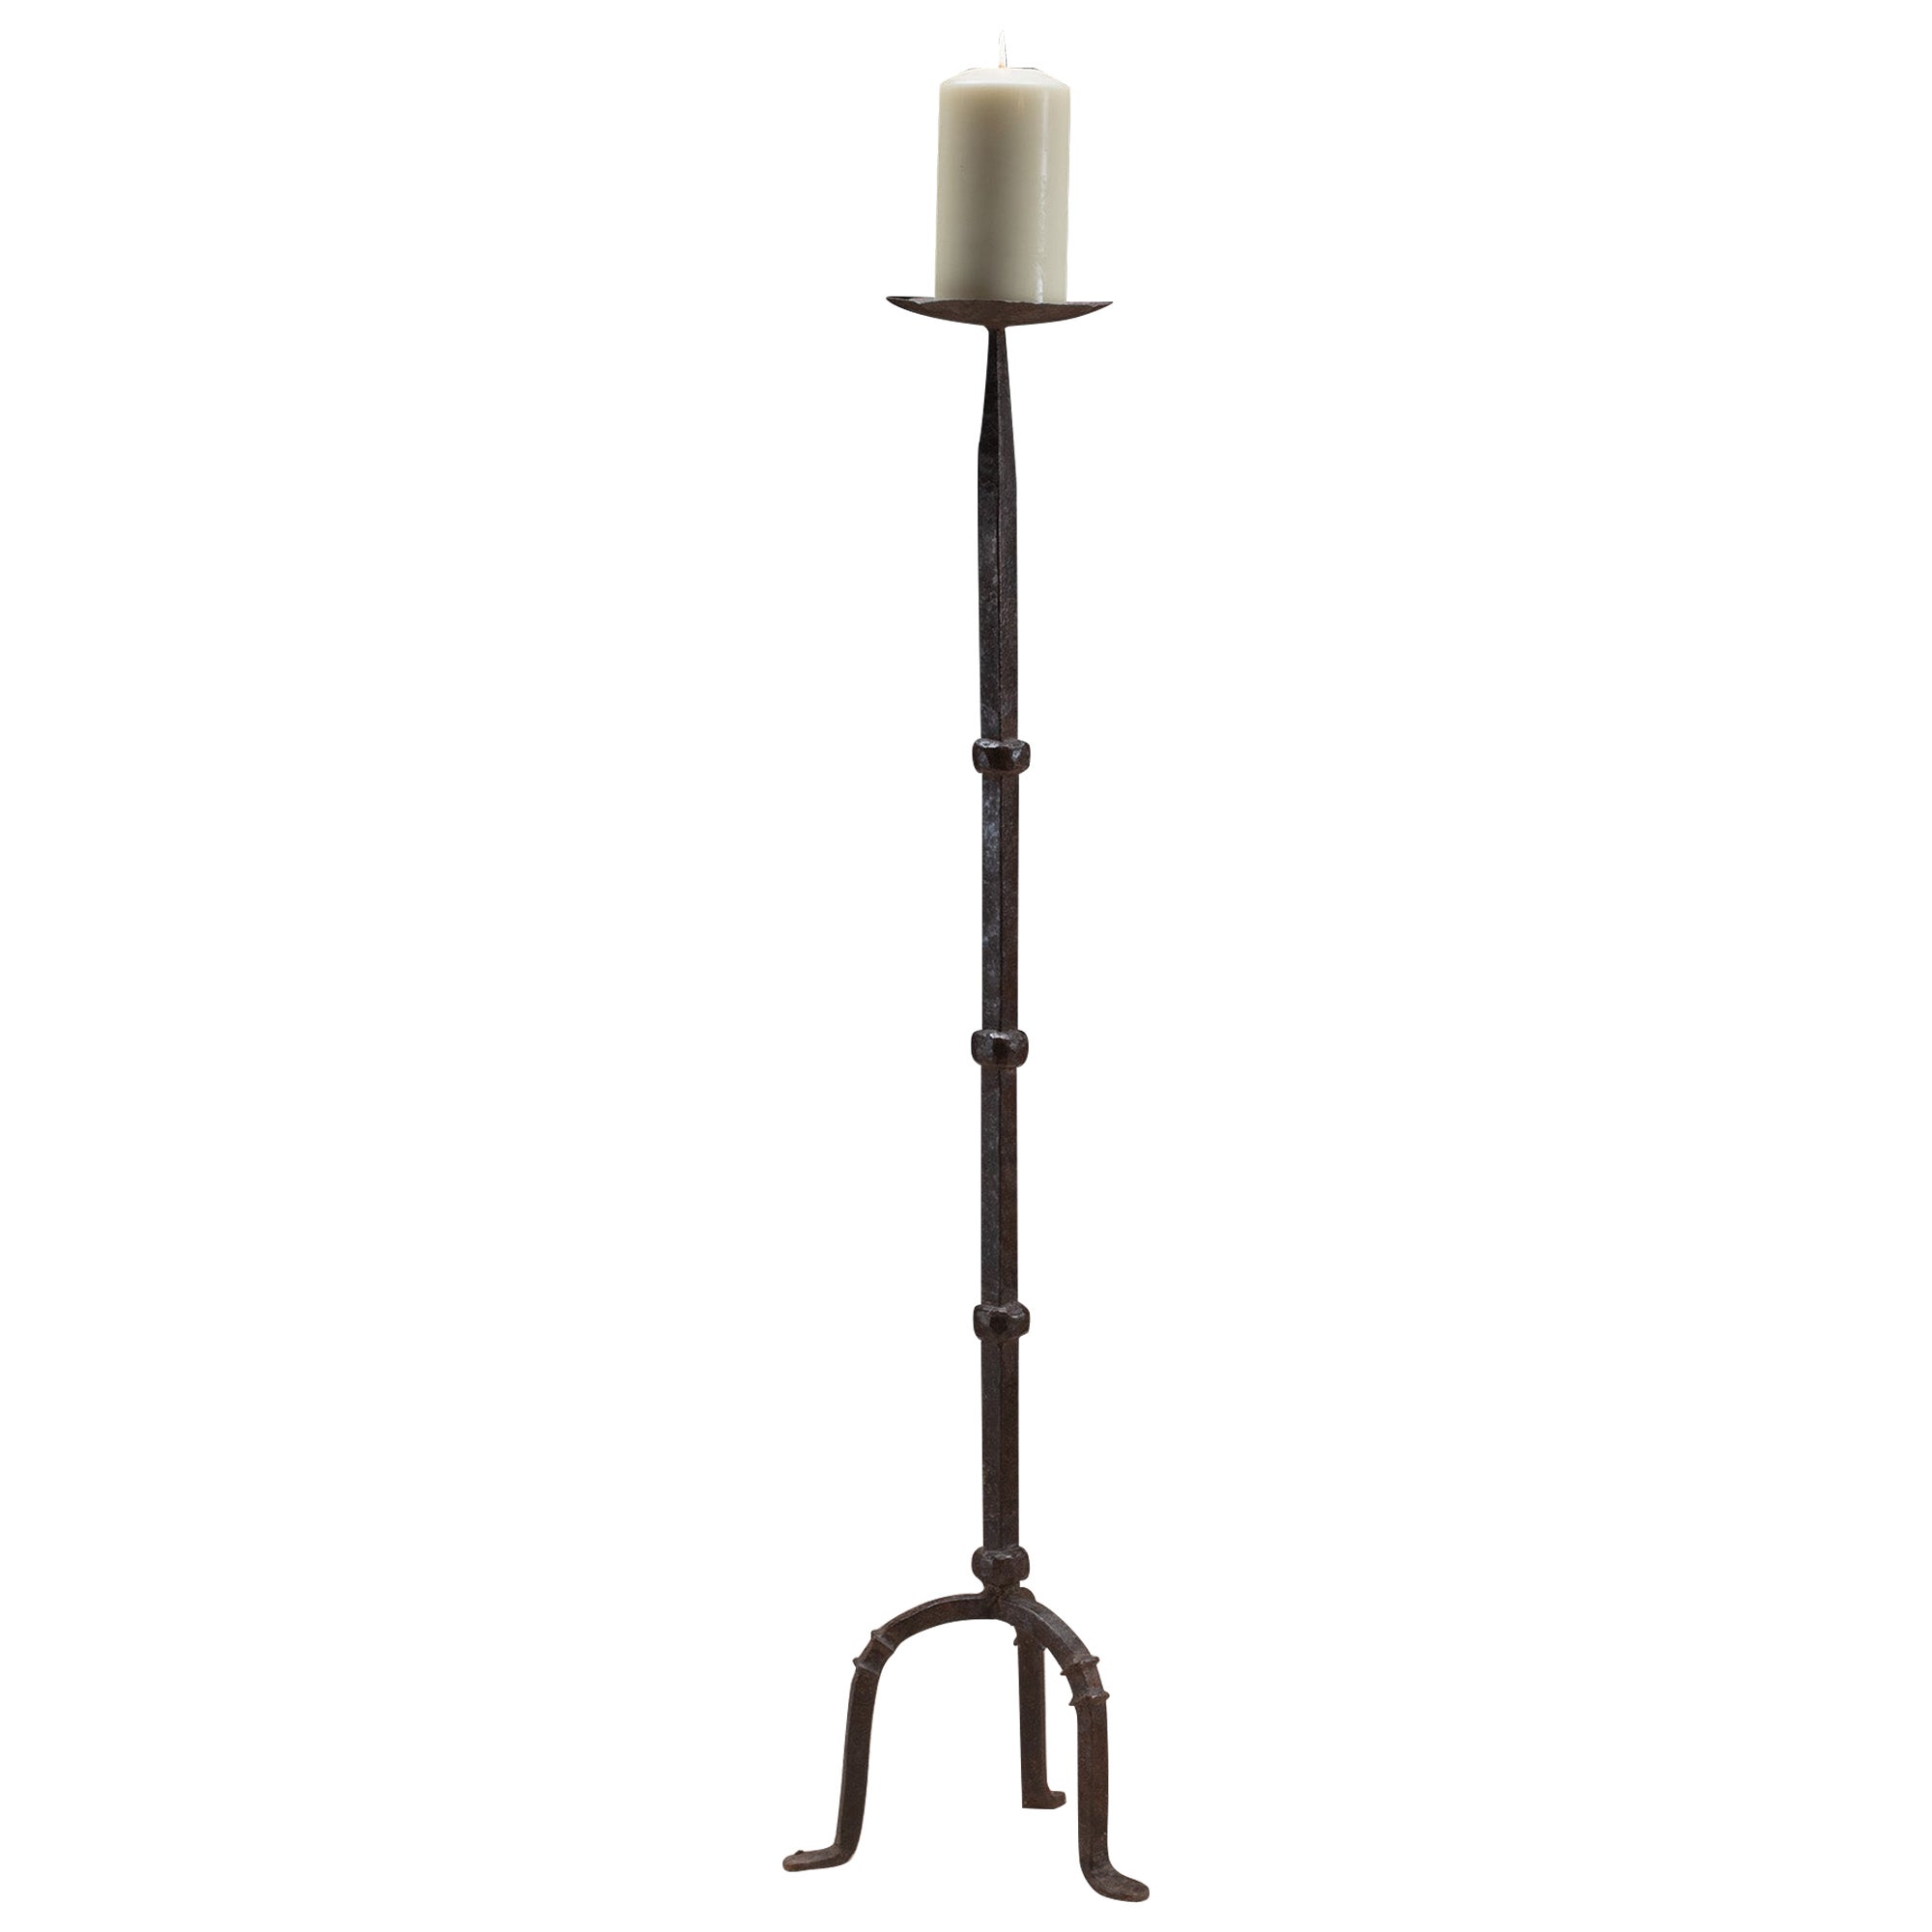 Torchere Iron Candle Gothic Tripod High 122cm., 4ft For Sale